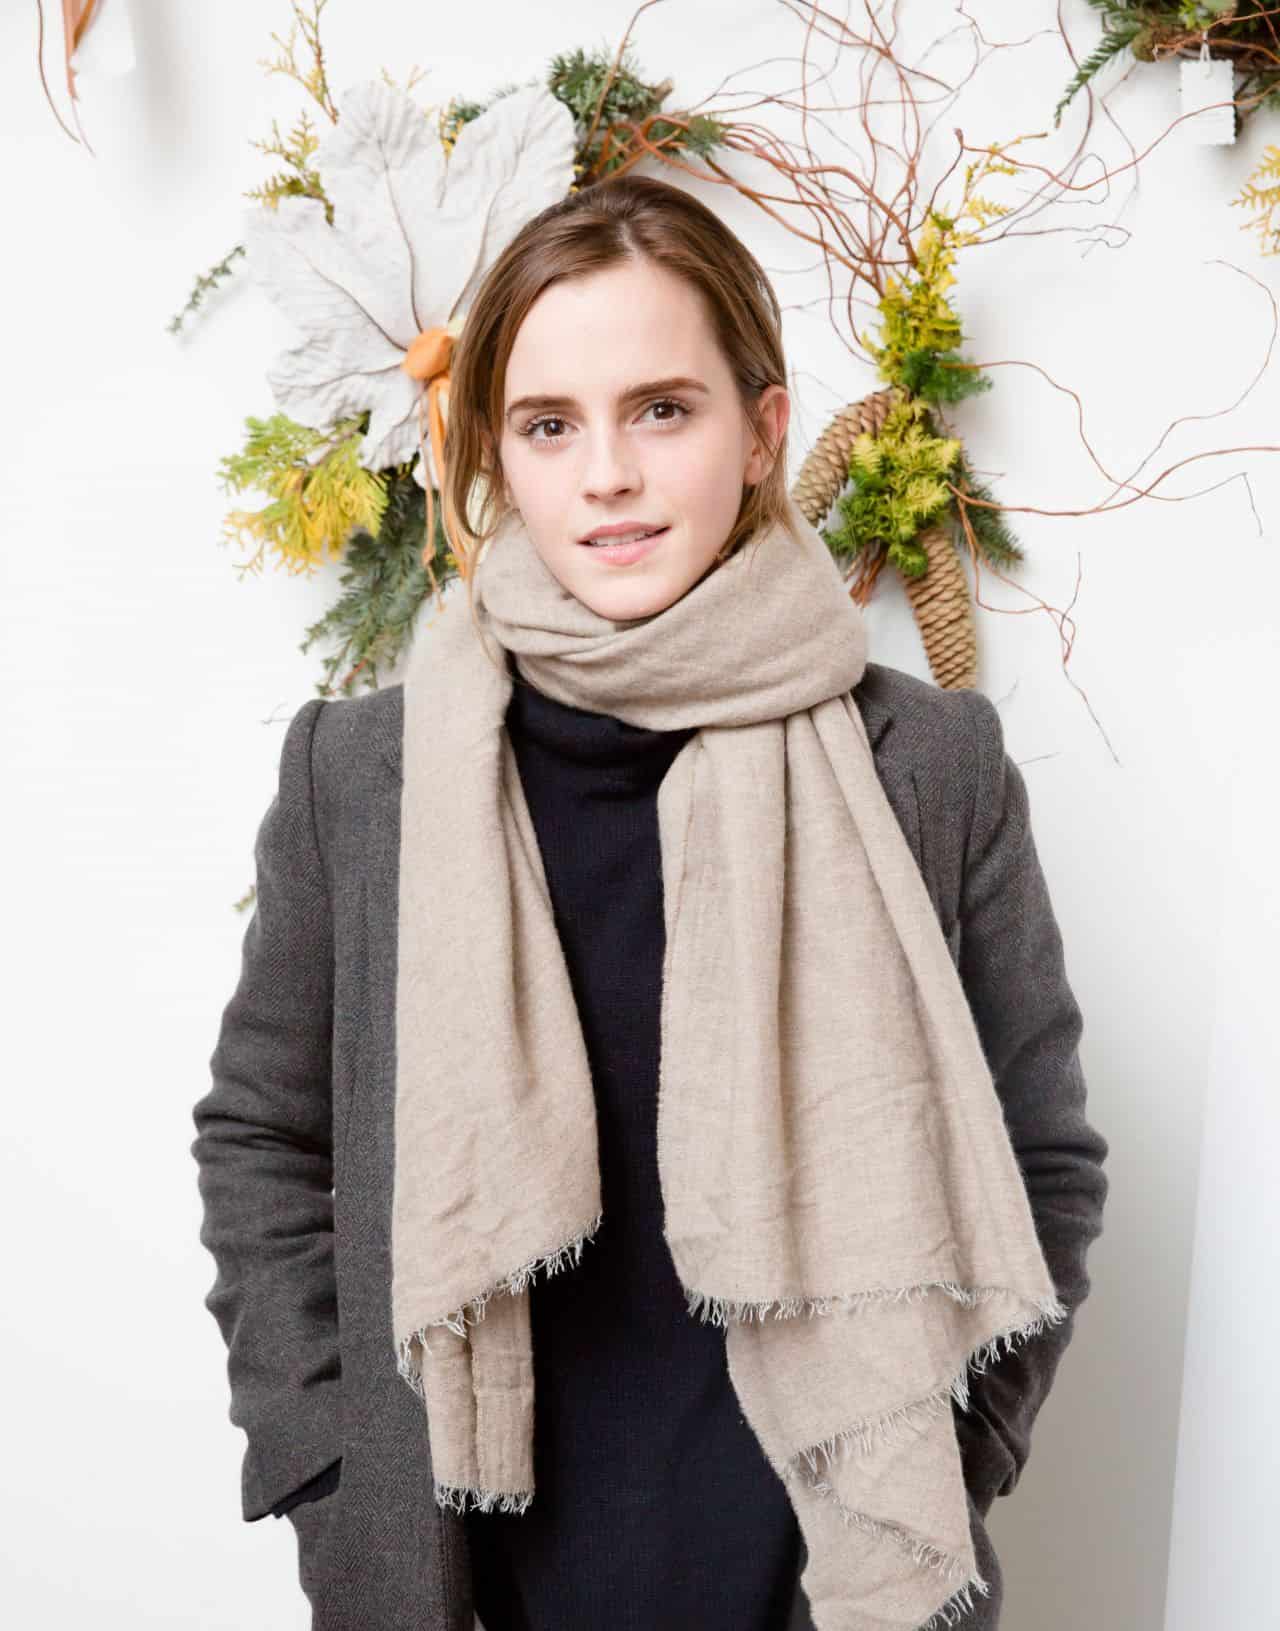 Emma Watson Charms at Domino Magazine's Holiday Pop-Up Event